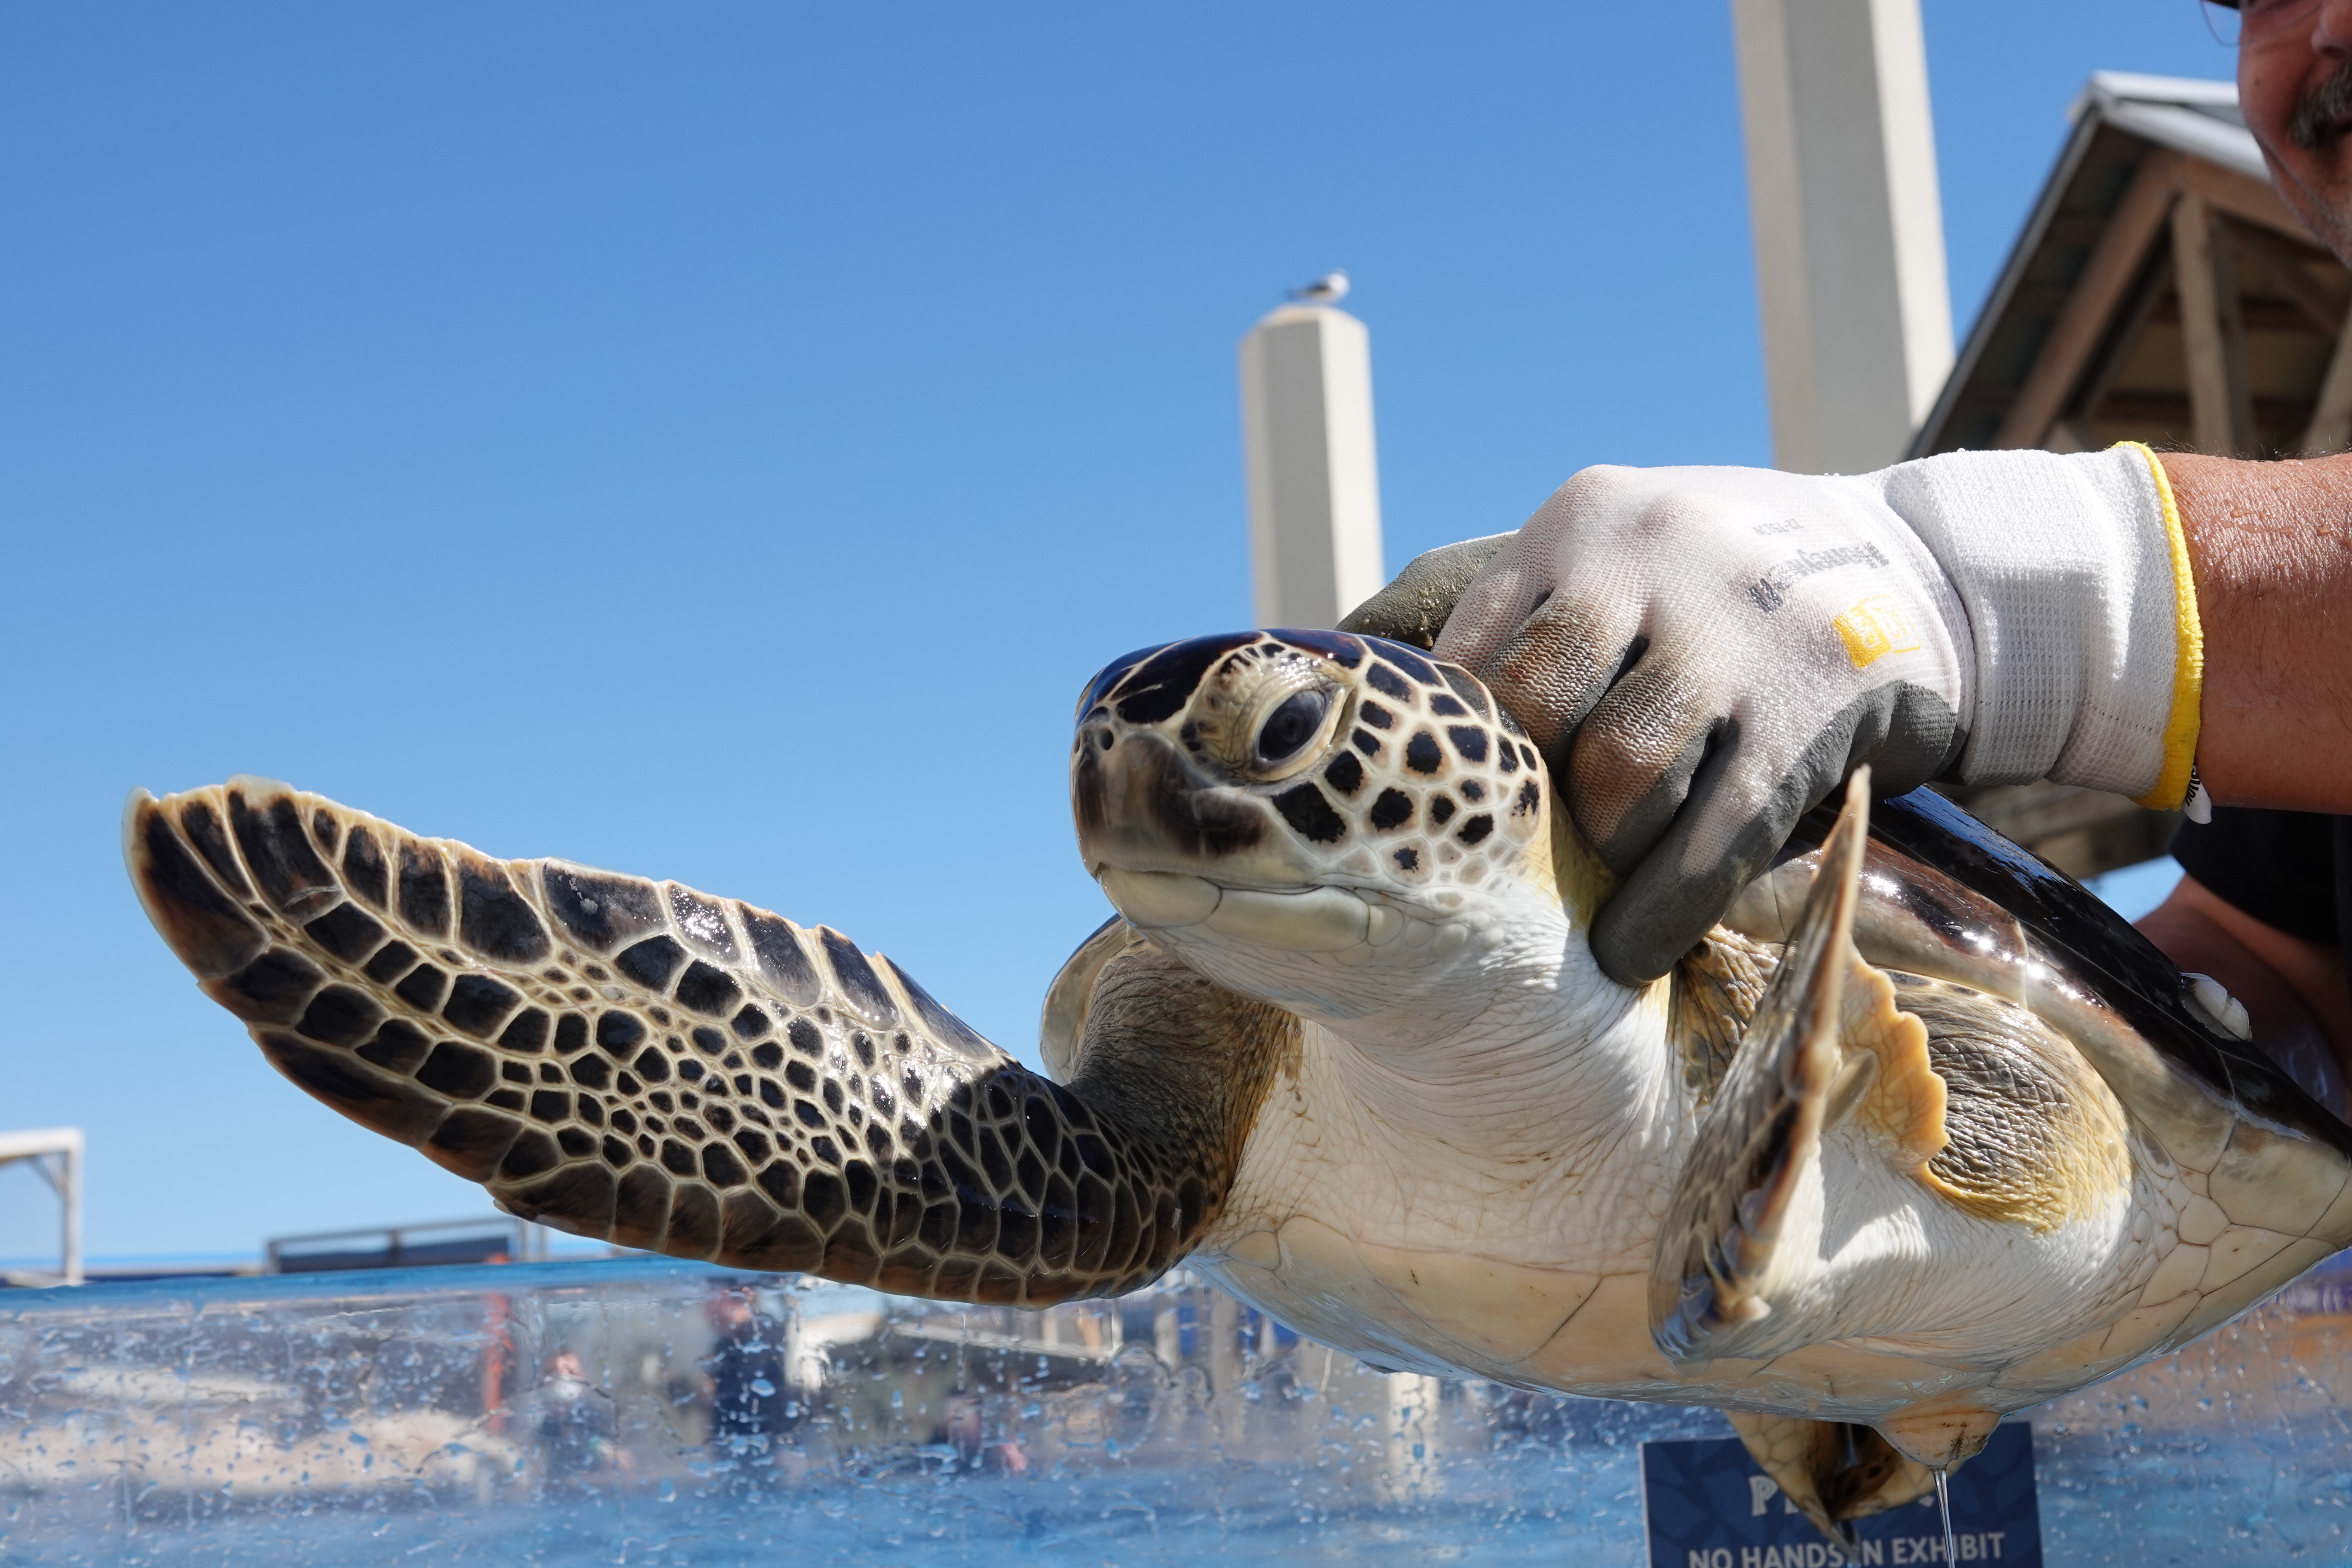 The Texas State Aquarium in Corpus Christi, U.S. Coast Guard and other organizations helped released 73 endangered sea turtles back into the wild after they were "cold-stunned" during freezing weather across Texas in early Febaruary. (Texas State Aquarium photo)